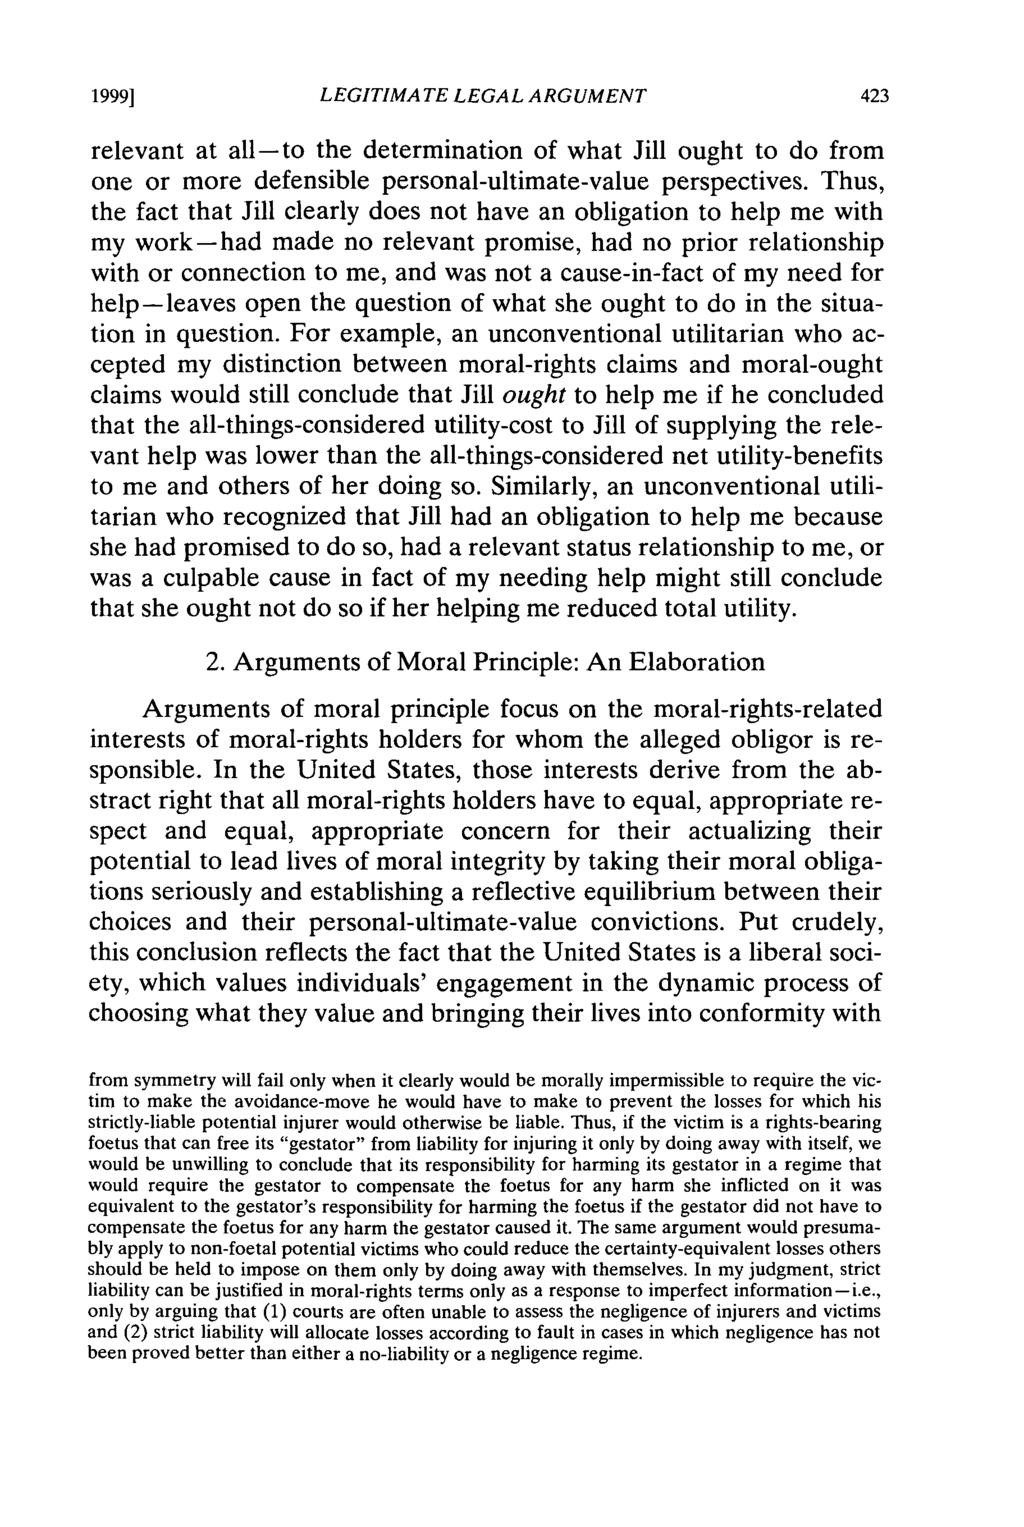 1999] LEGITIMATE LEGAL ARGUMENT relevant at all-to the determination of what Jill ought to do from one or more defensible personal-ultimate-value perspectives.